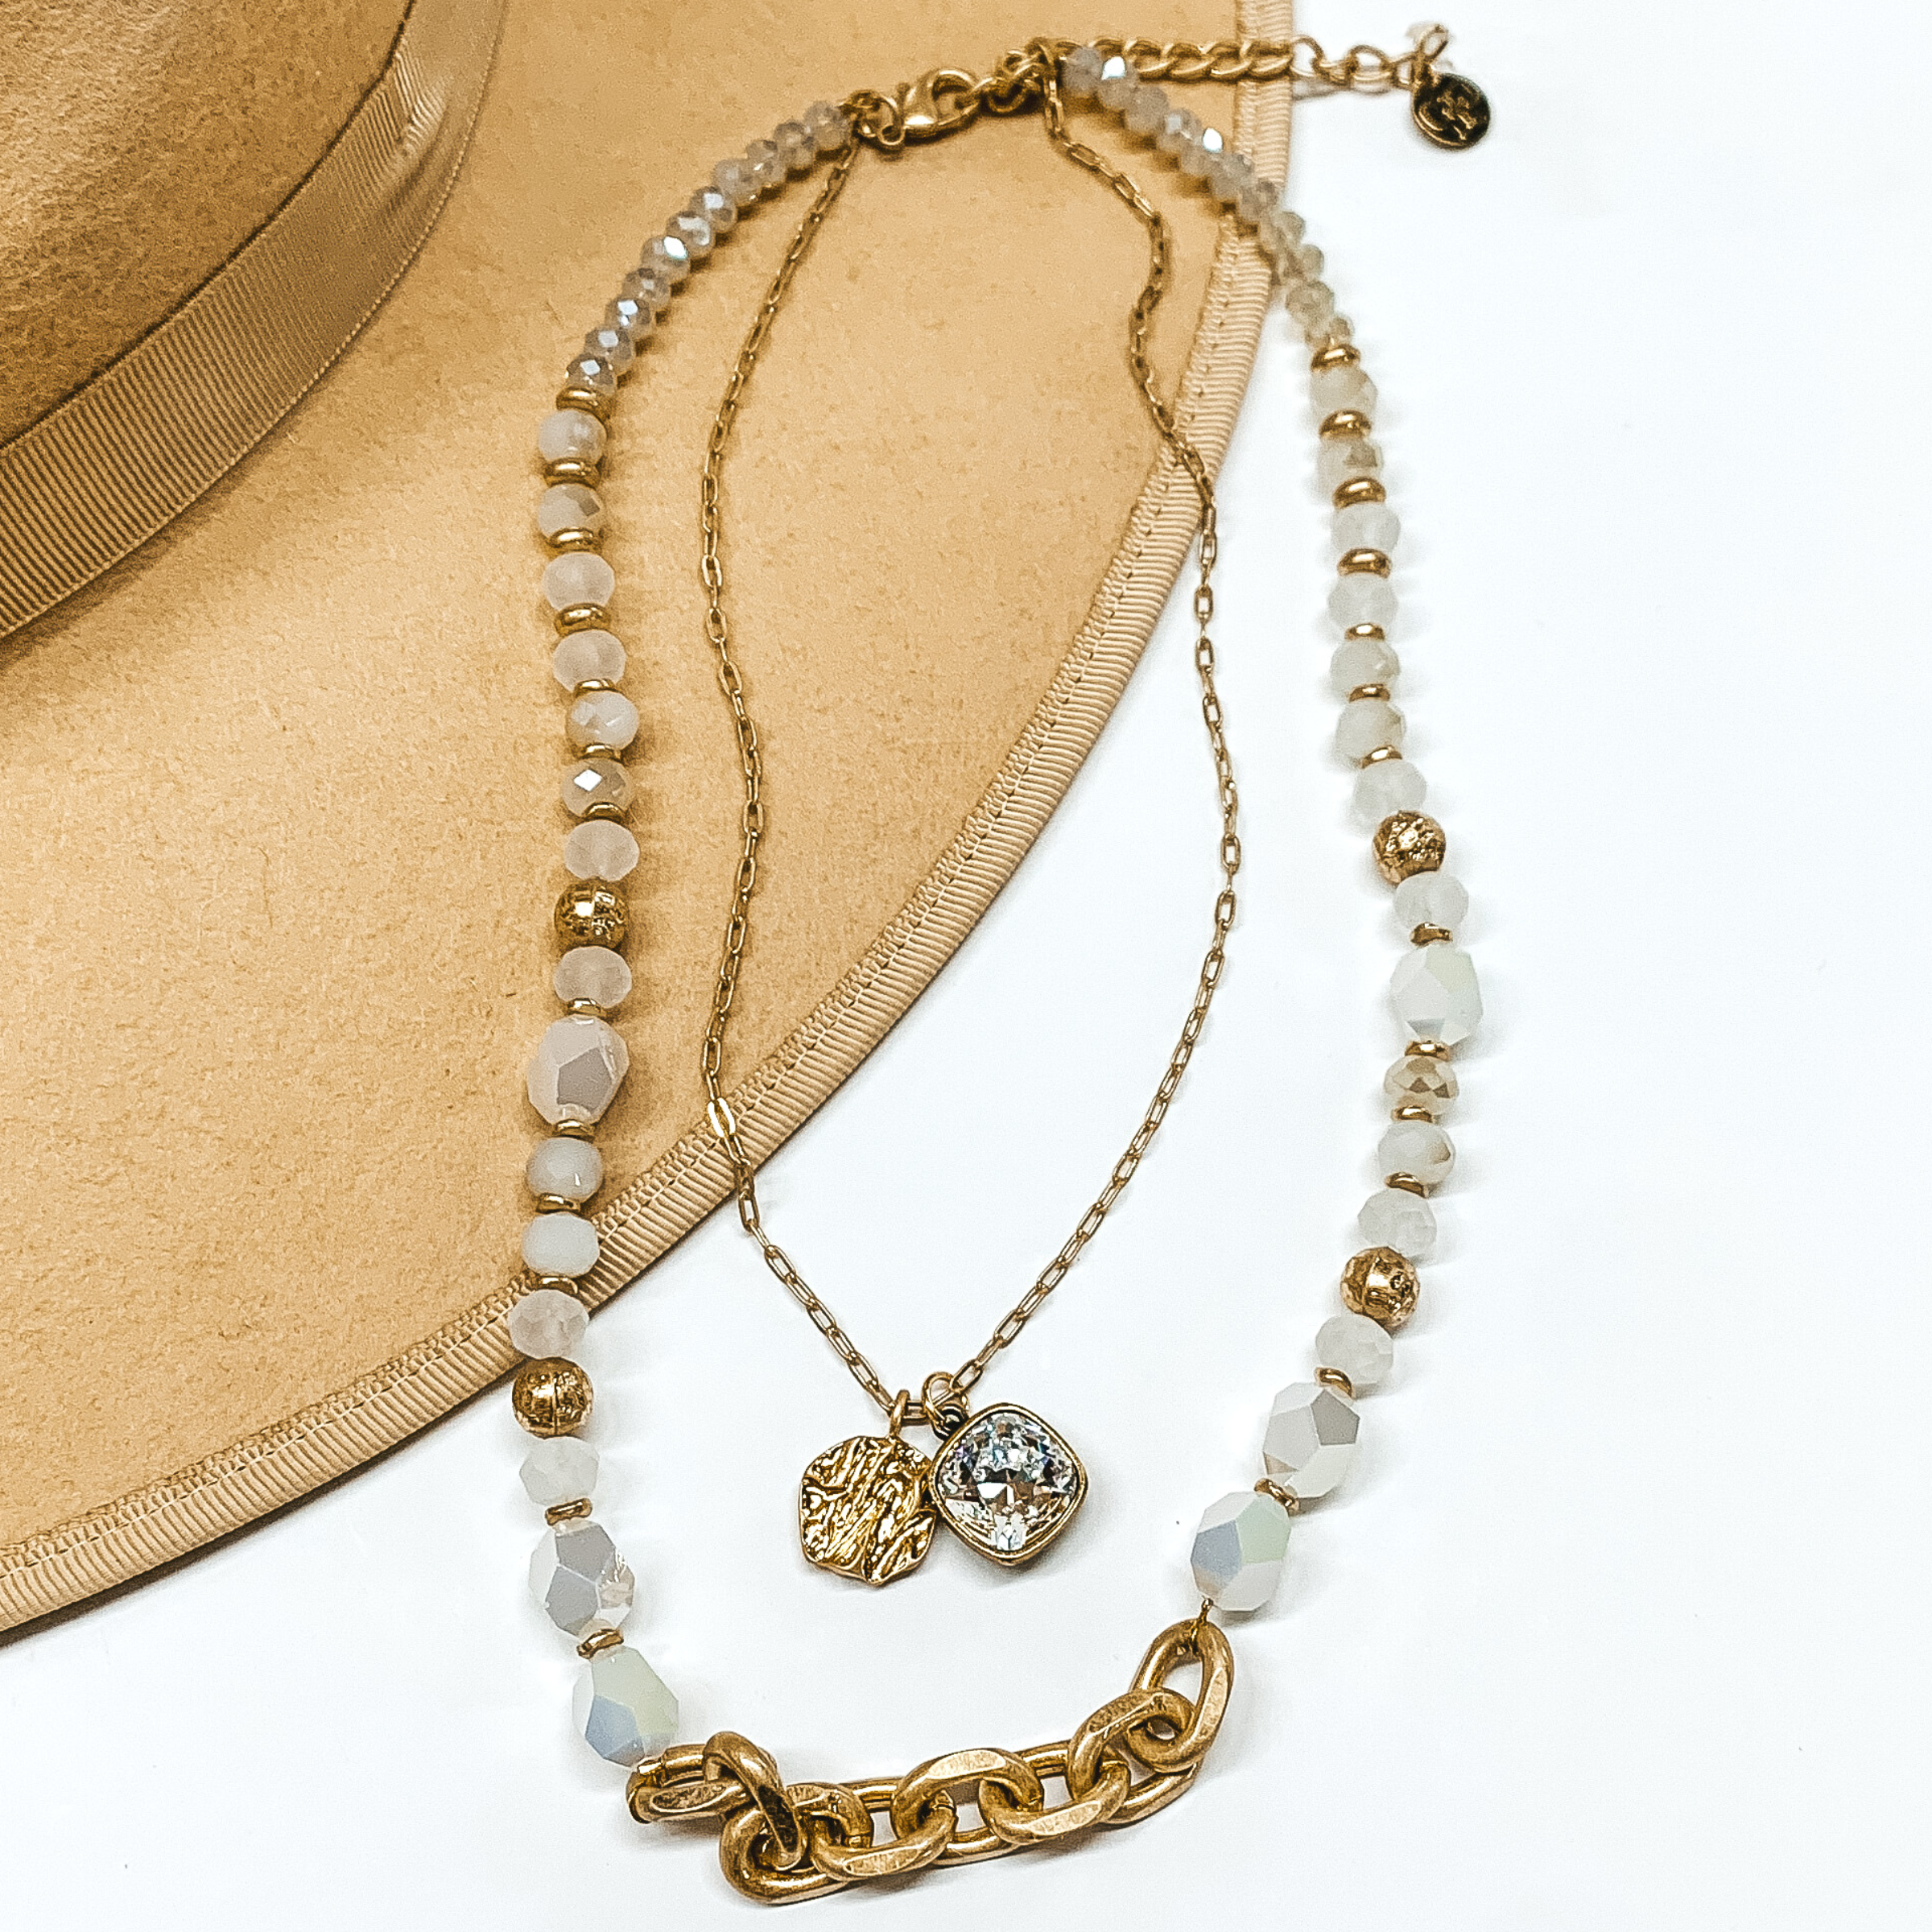 This is a two strand necklace that has one short dainty chain and a longer white crystal beaded strand with a gold chain segment. The shorter chain includes a gold coin charm and clear cushion cut crytal charm. This necklace is pictured partially laying on a tan brim on a white background. 